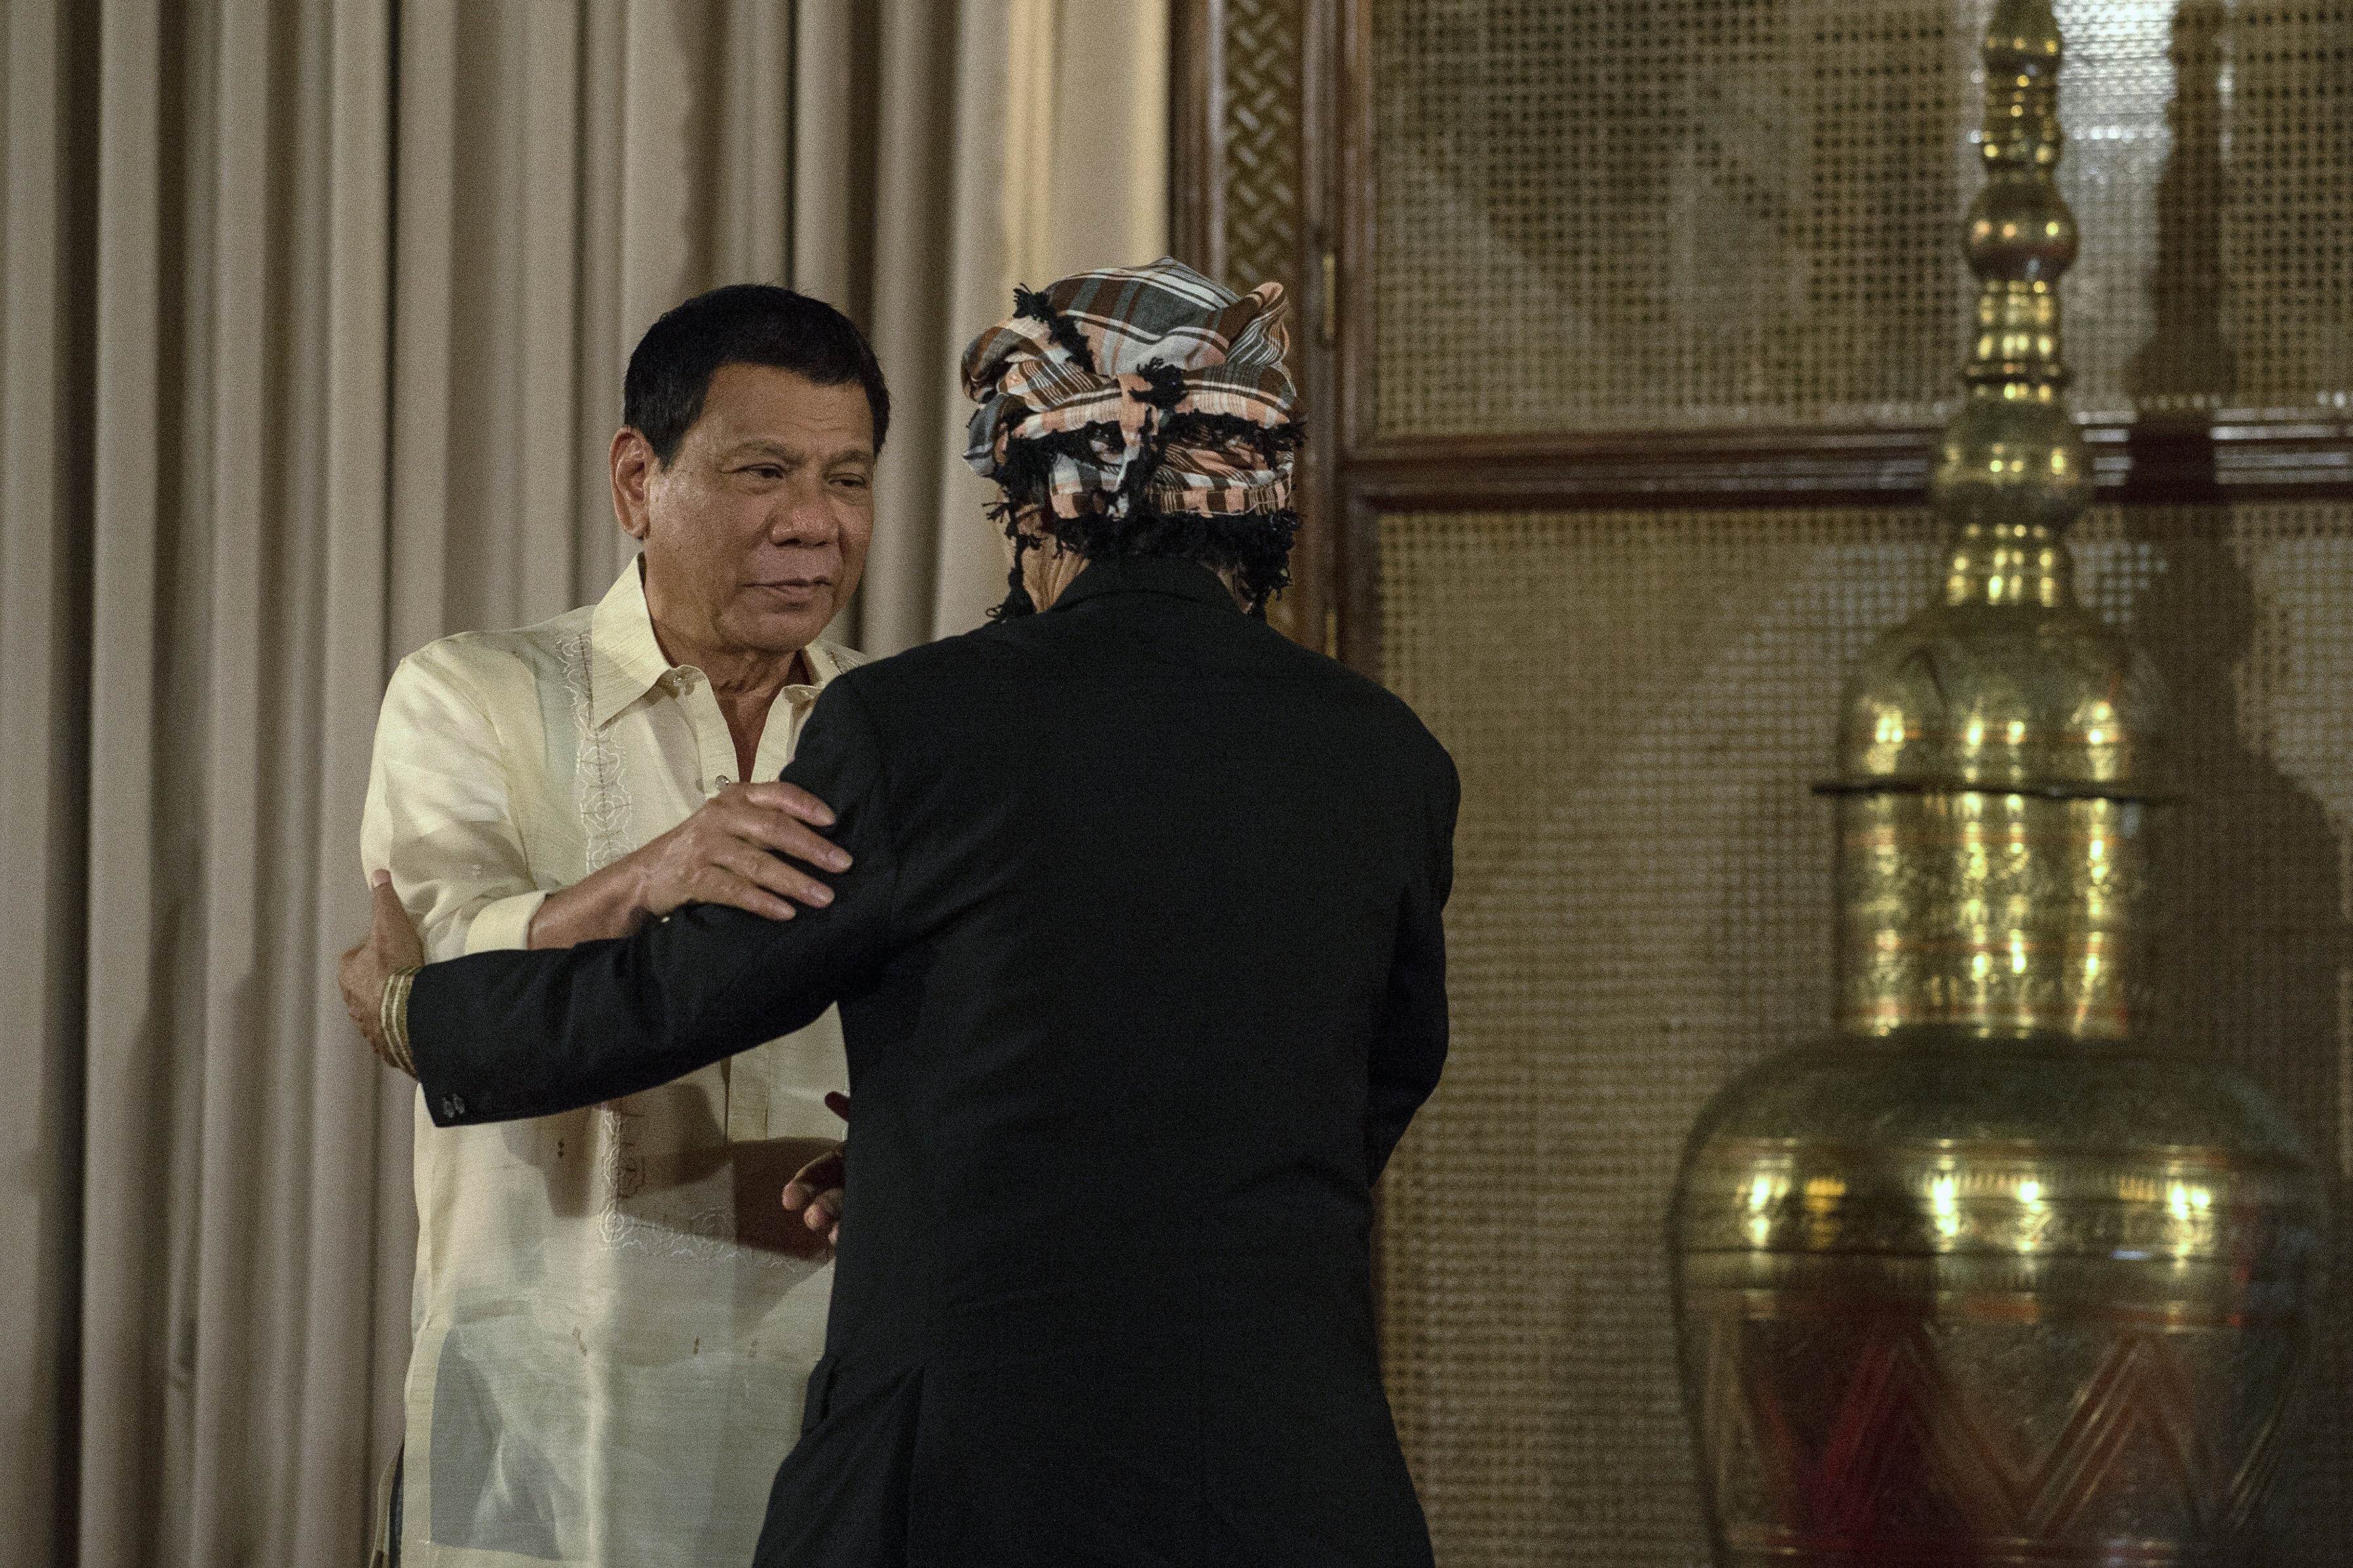 Philippine President Rodrigo Duterte greets Moro National Liberation Front founder Nur Misuari at the Malacanang Palace on November 3, 2016. An influential leader of the Philippines' decades-long Muslim separatist insurgency voiced support November 3 for peace efforts after rebellion charges against him were suspended and he held a surprise meeting with President Rodrigo Duterte. / AFP PHOTO / NOEL CELIS